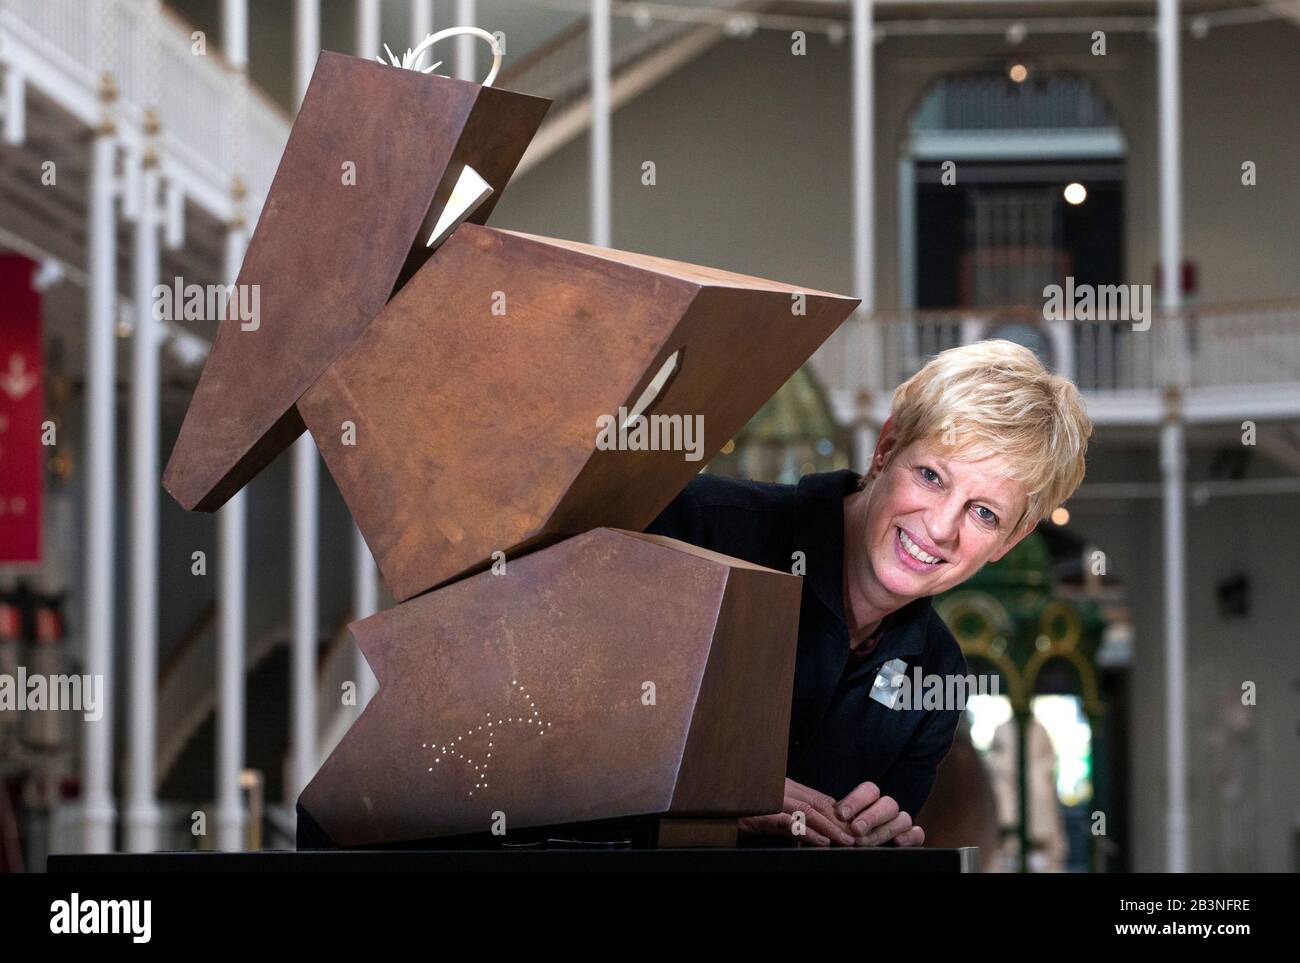 Artist Simone ten Hompel unveils her sculpture 'Coordinate' prior to going on permanent display at the National Museum of Scotland, Edinburgh. Stock Photo